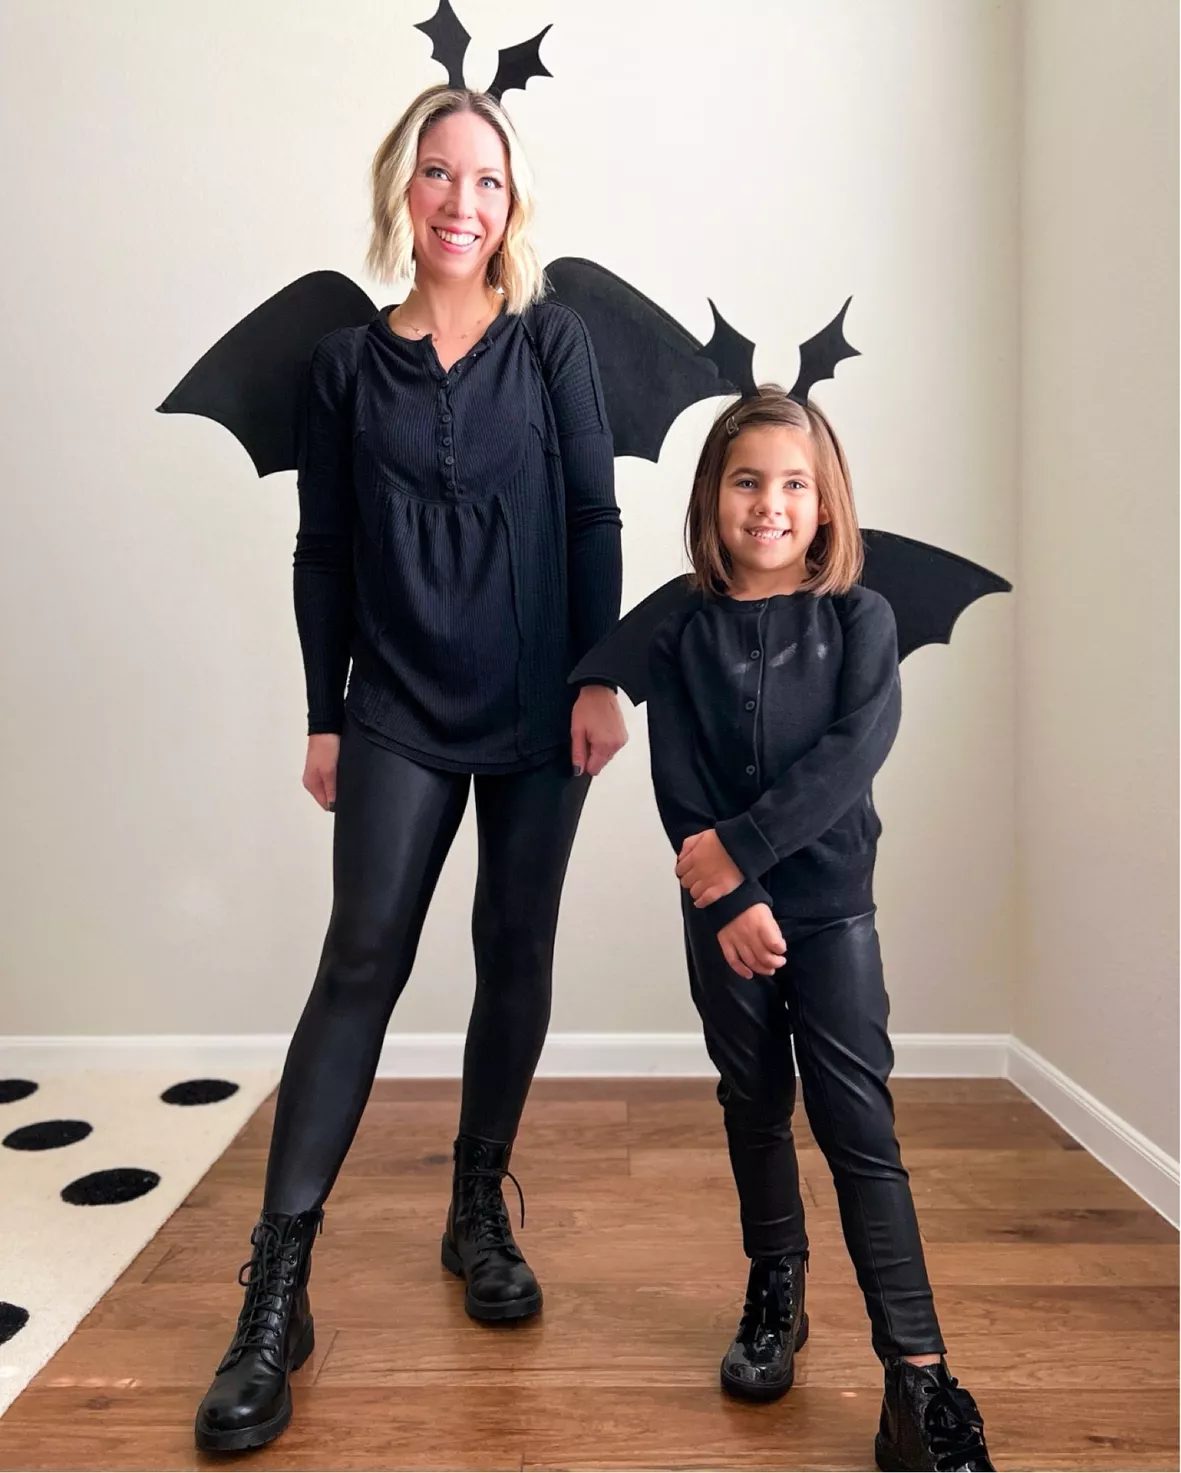 Halloween Costumes to Make With Black Leggings